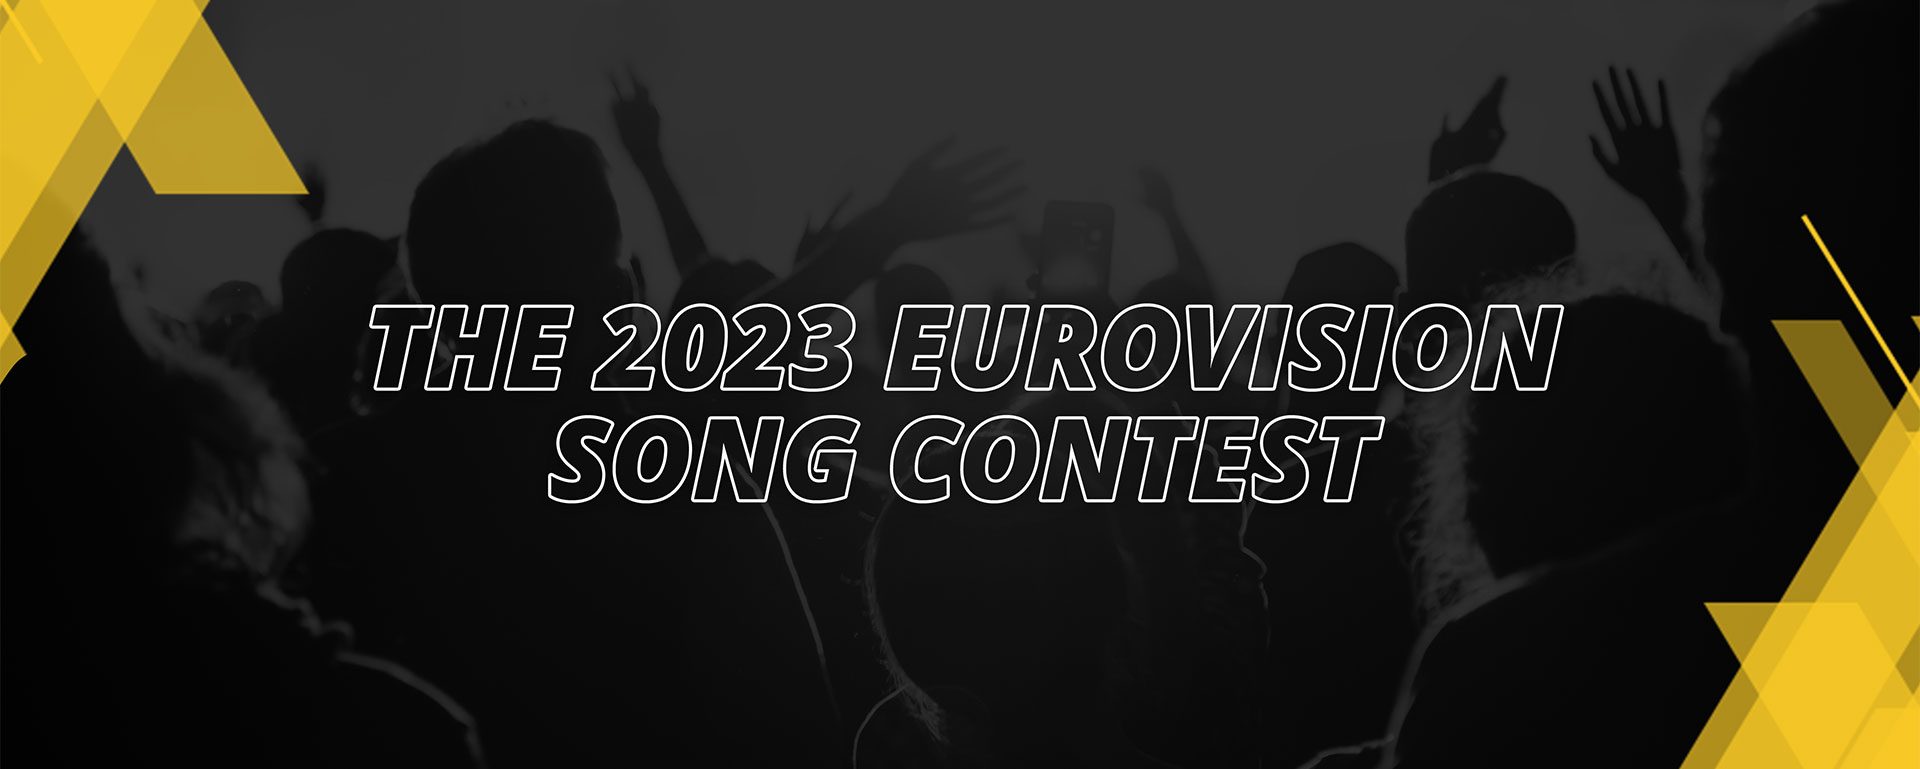 THE 2023 EUROVISION SONG CONTEST